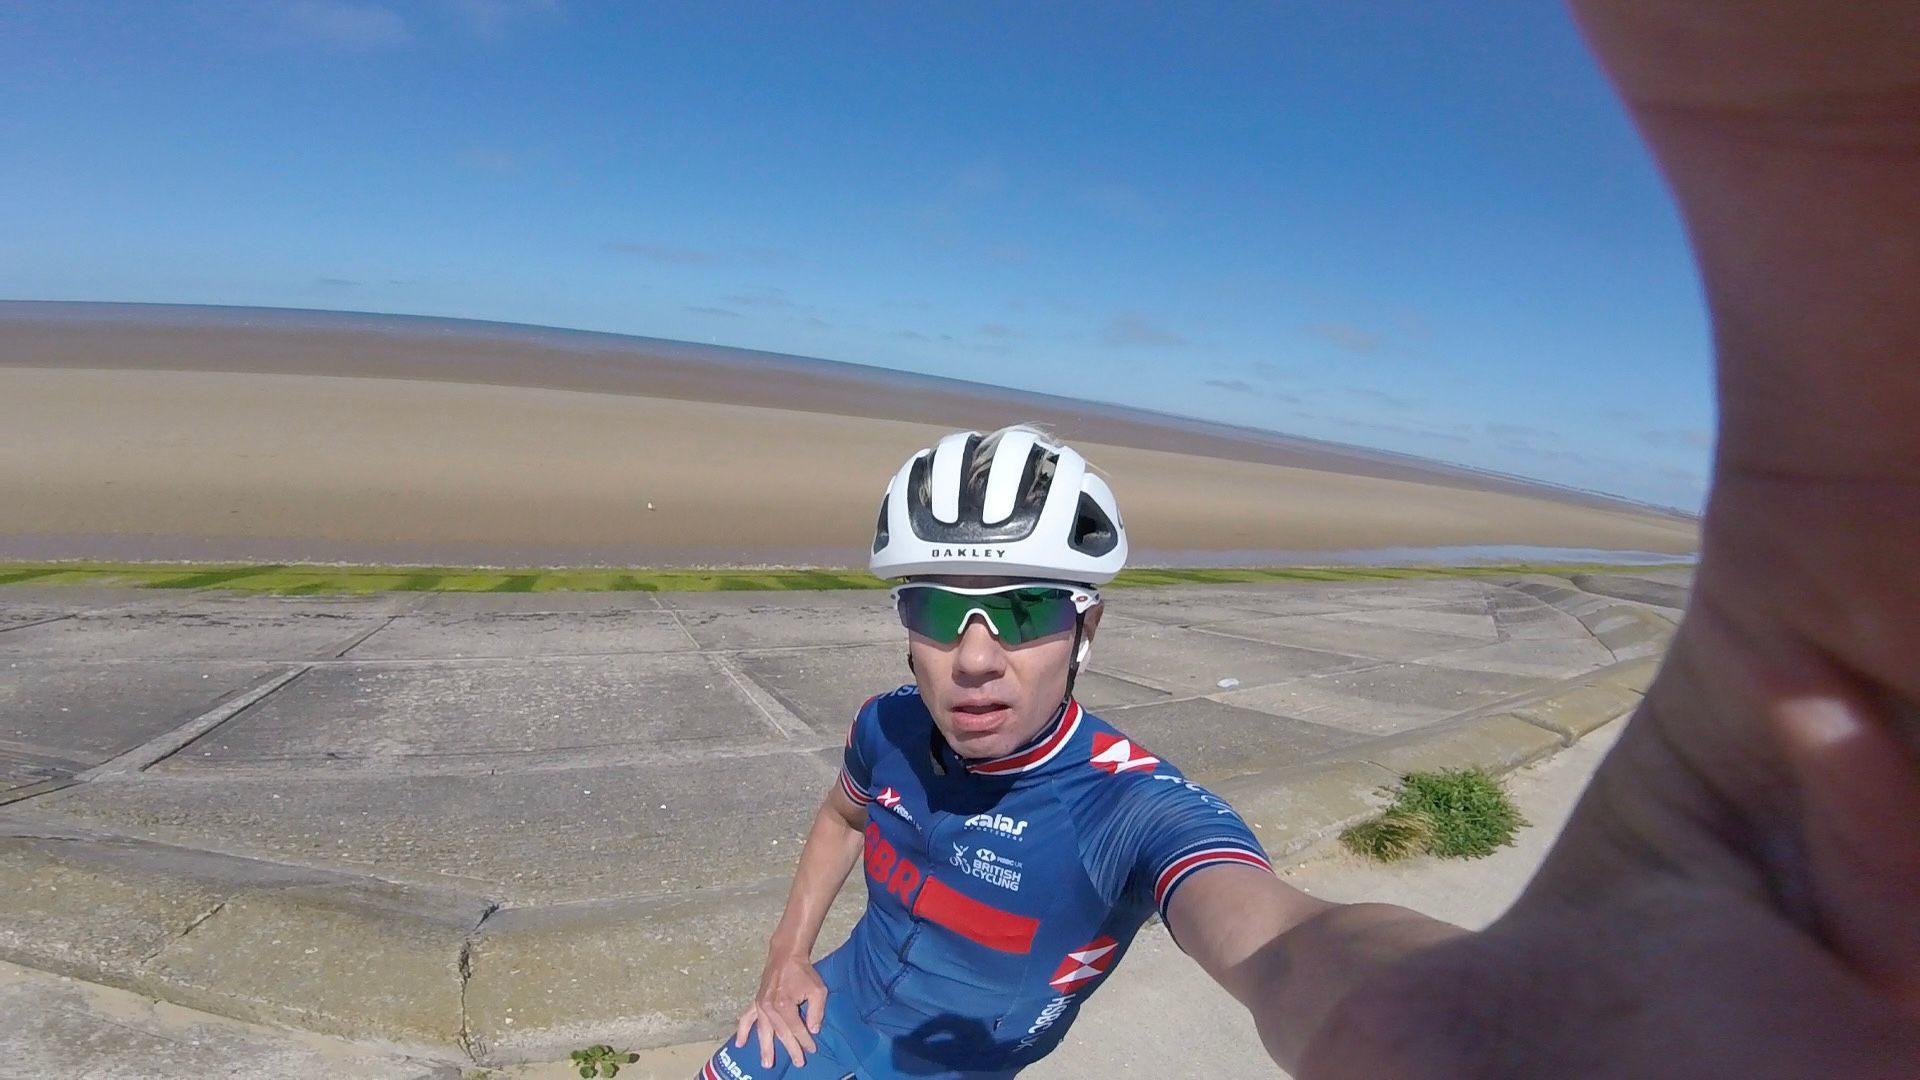 Champion cyclist Rik Waddon is thanking the North West Air Ambulance charity for helping save his life.